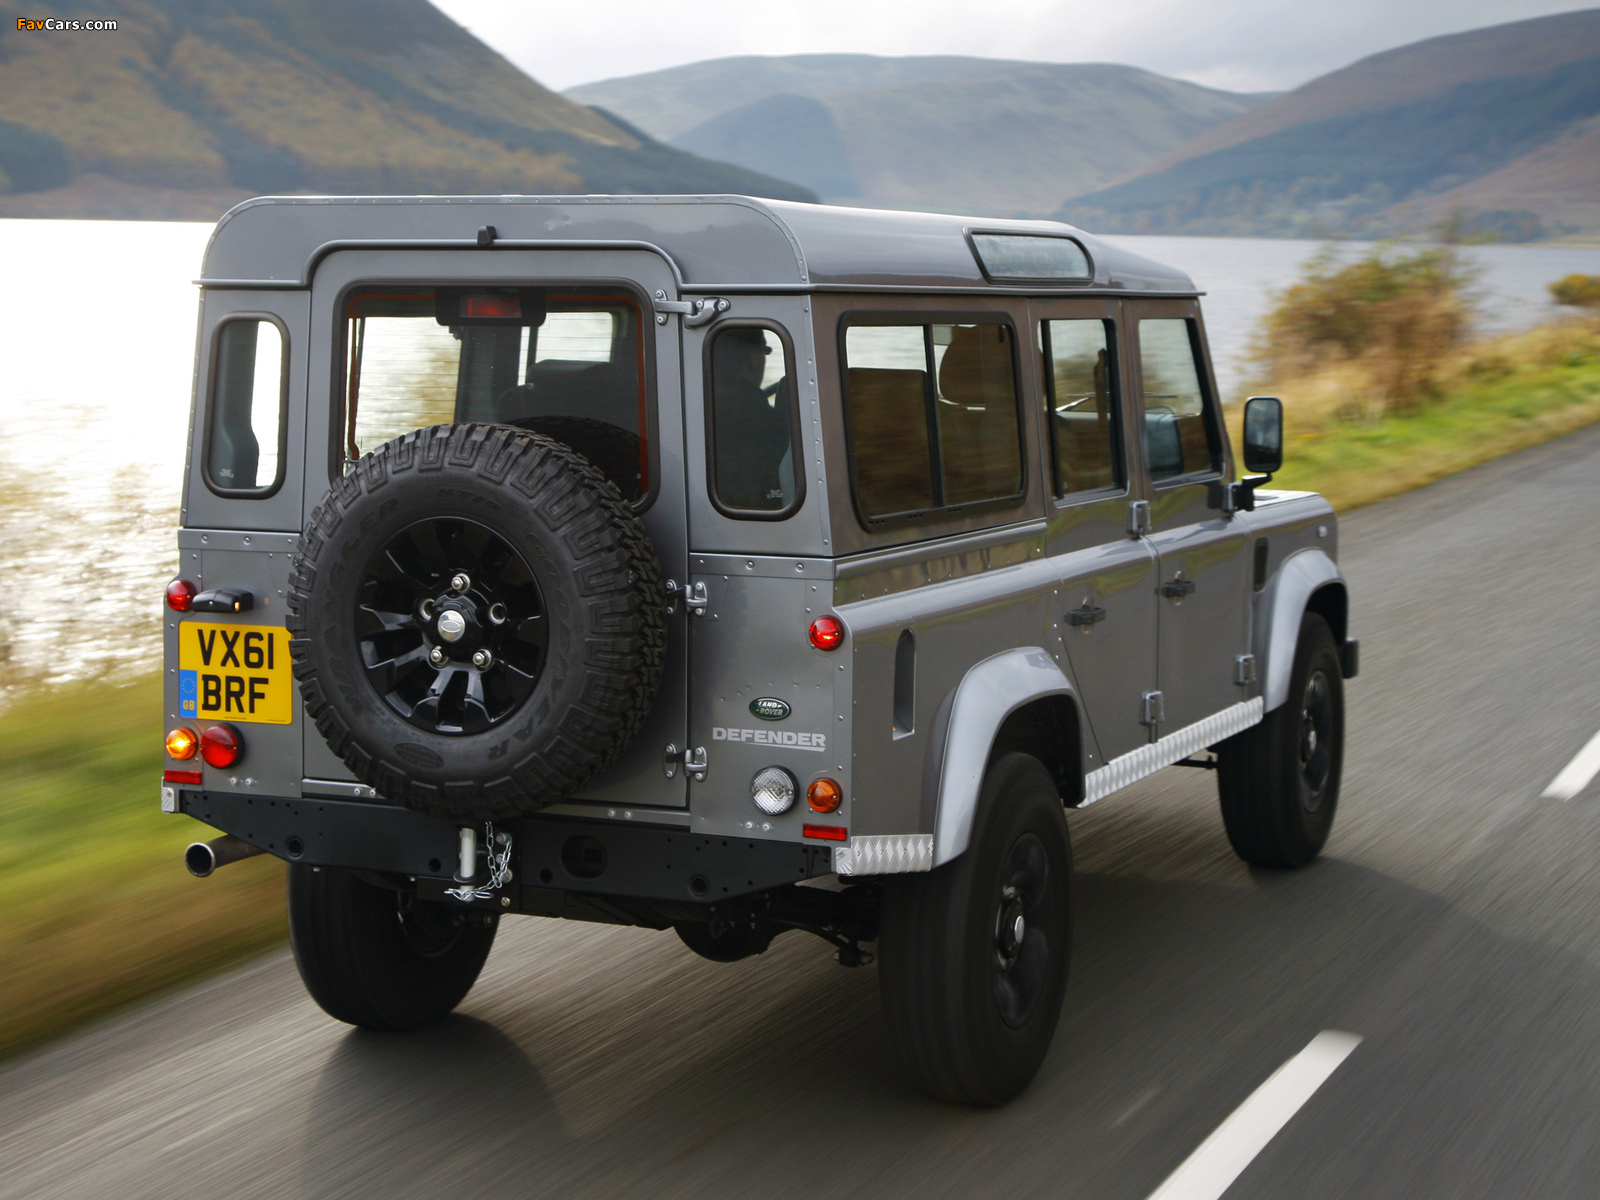 Land Rover Defender 110 Station Wagon EU-spec 2007 pictures (1600 x 1200)